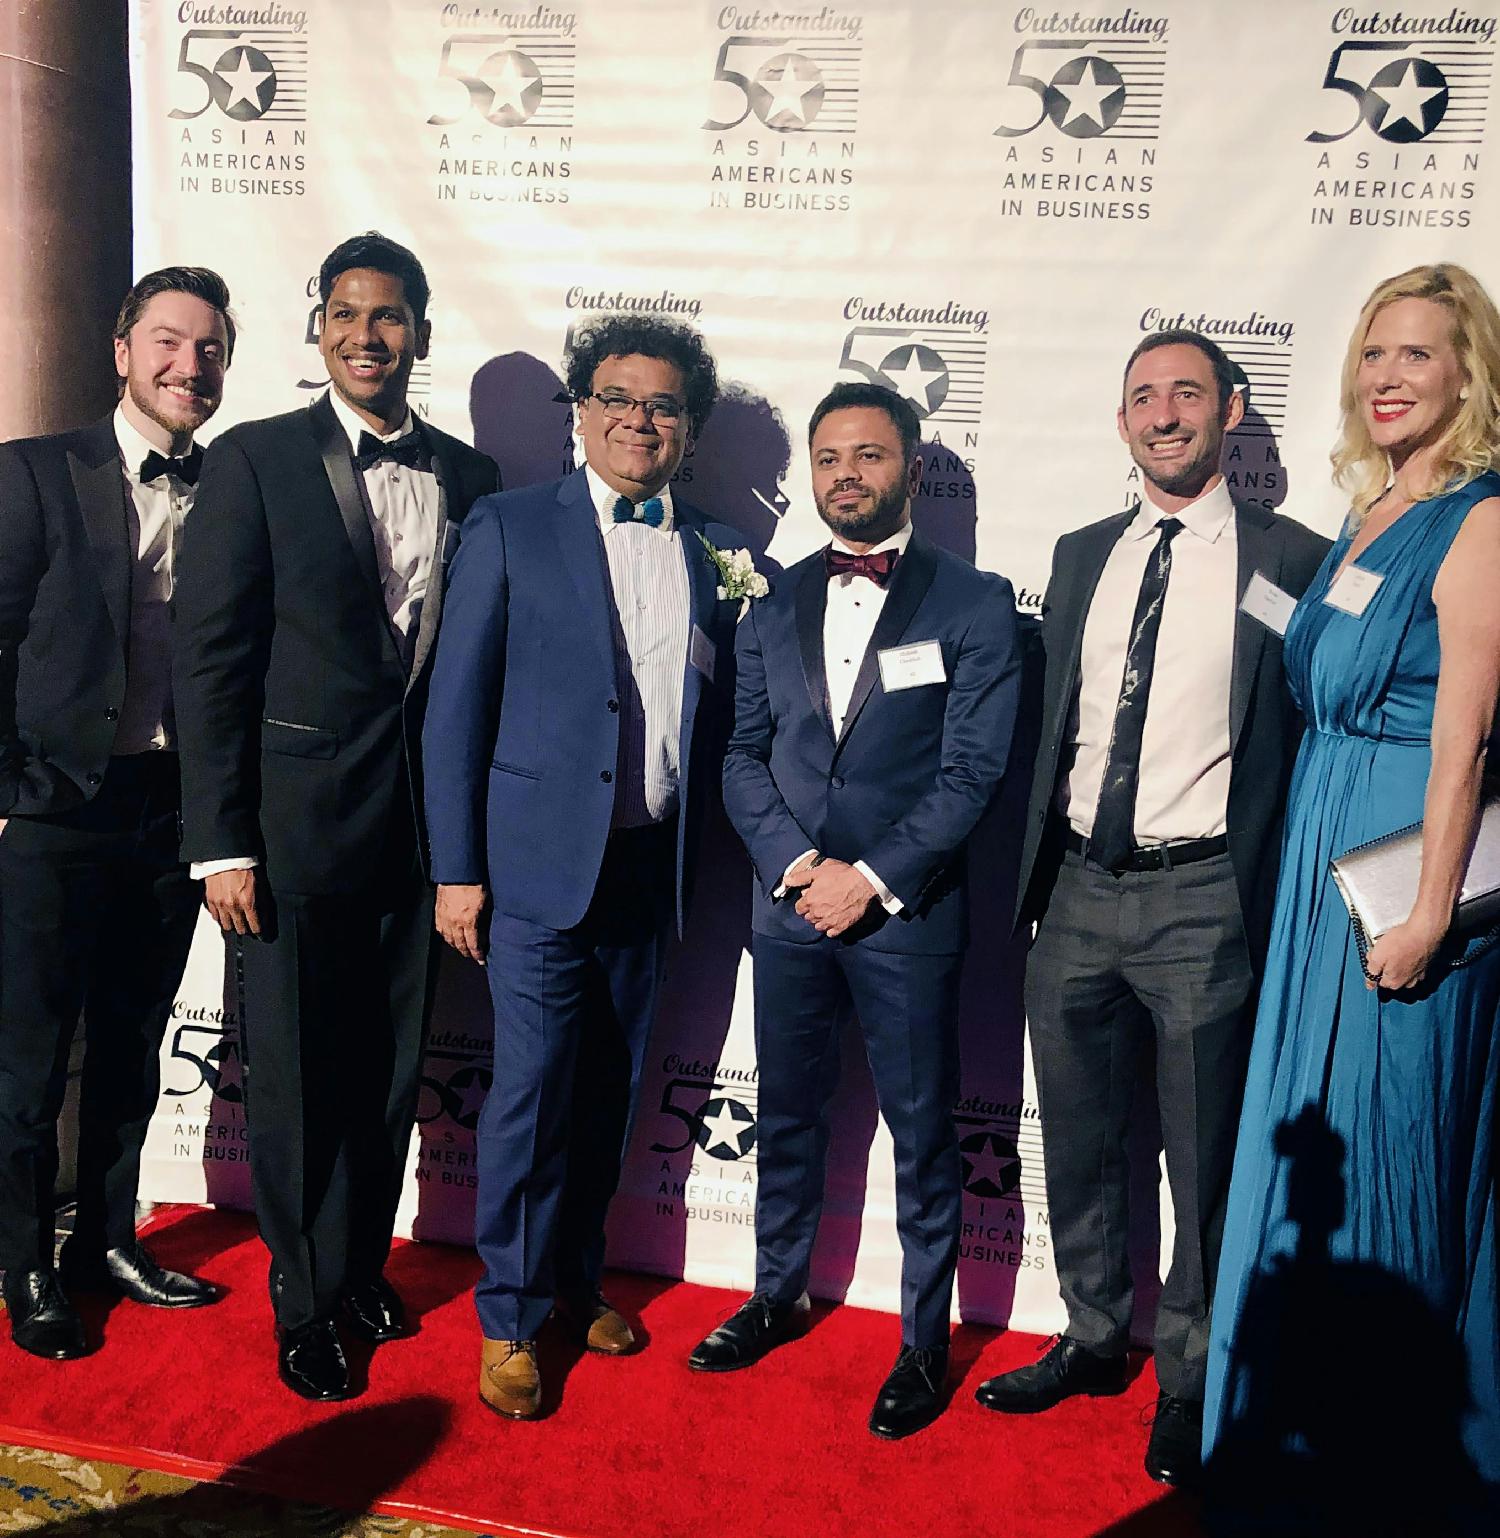 Reservations.com management celebrating Co-Founder Yatin Patel's receipt of an Outstanding 50 Asian Americans in Business award.